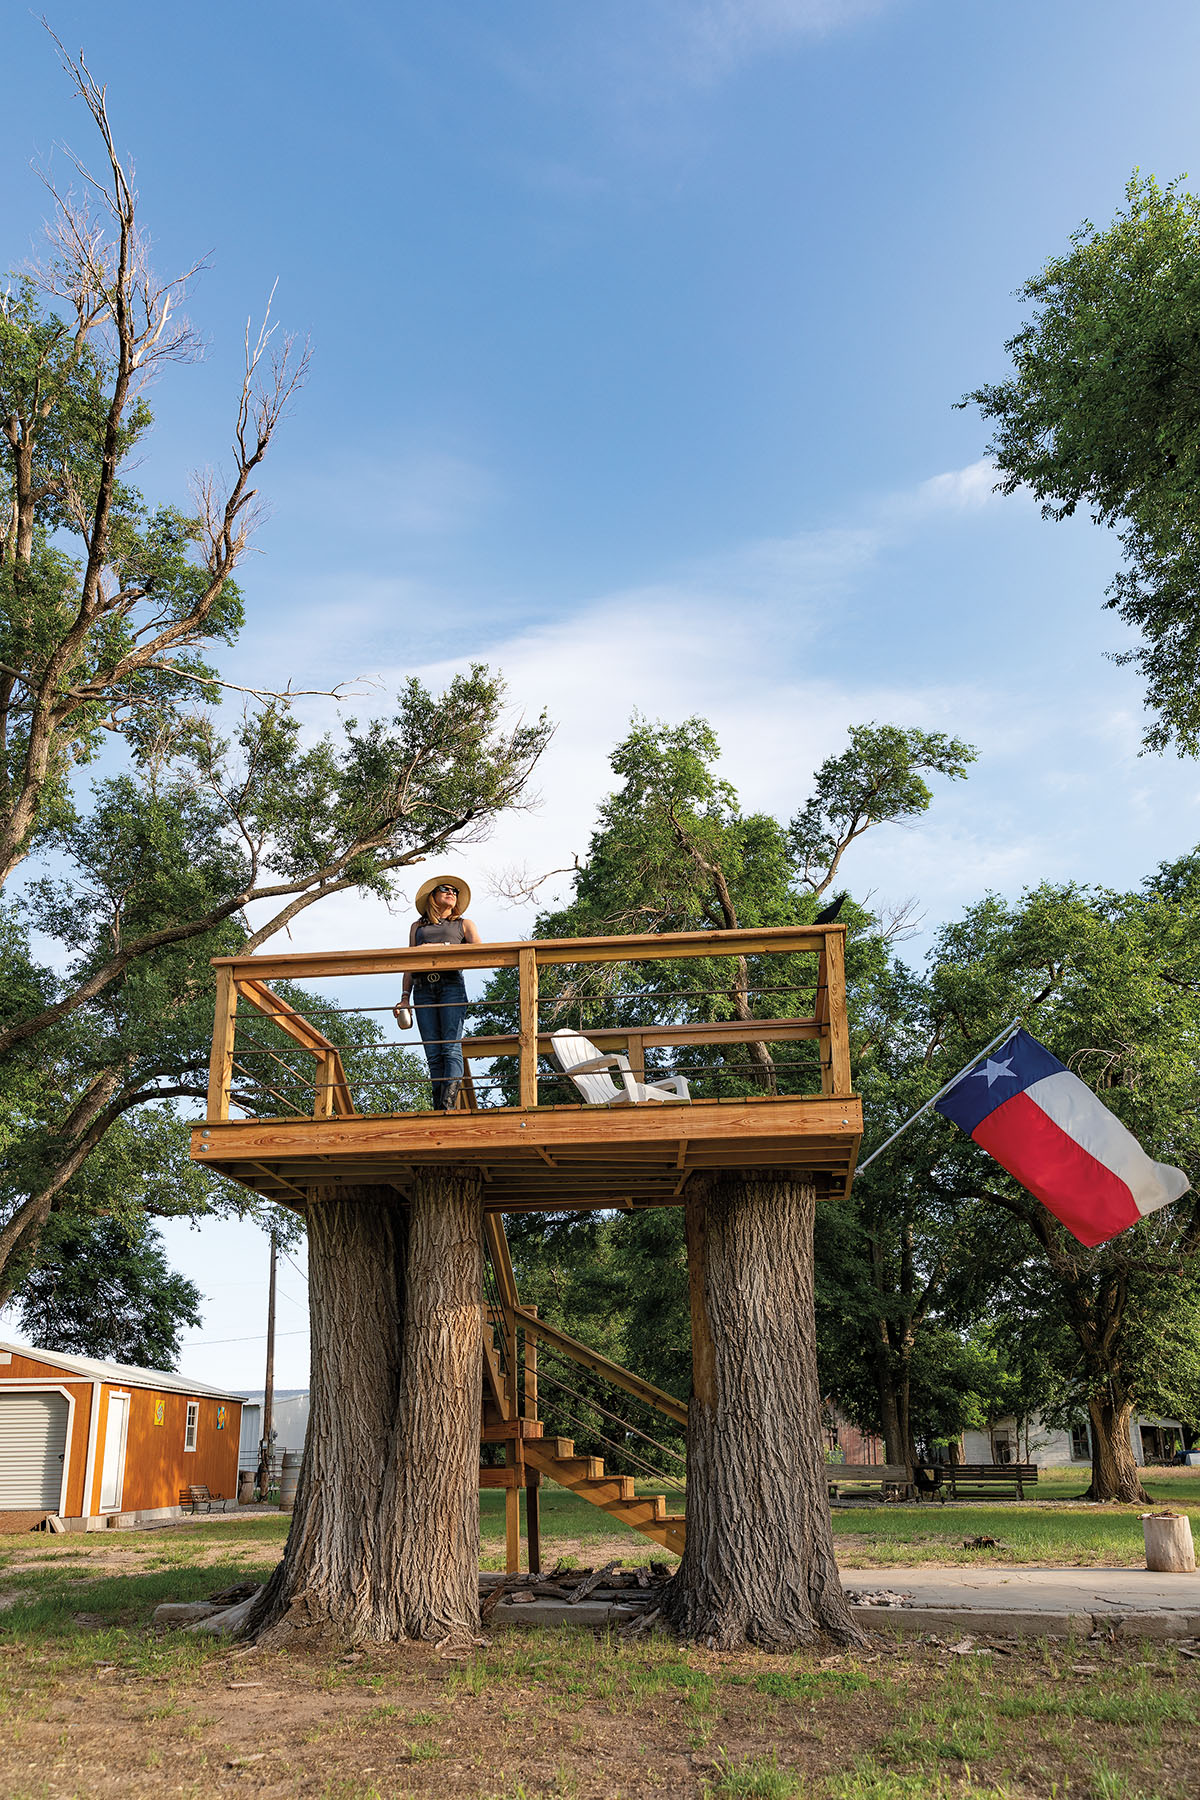 A man stands on a platform in the trees next to a Texas flag